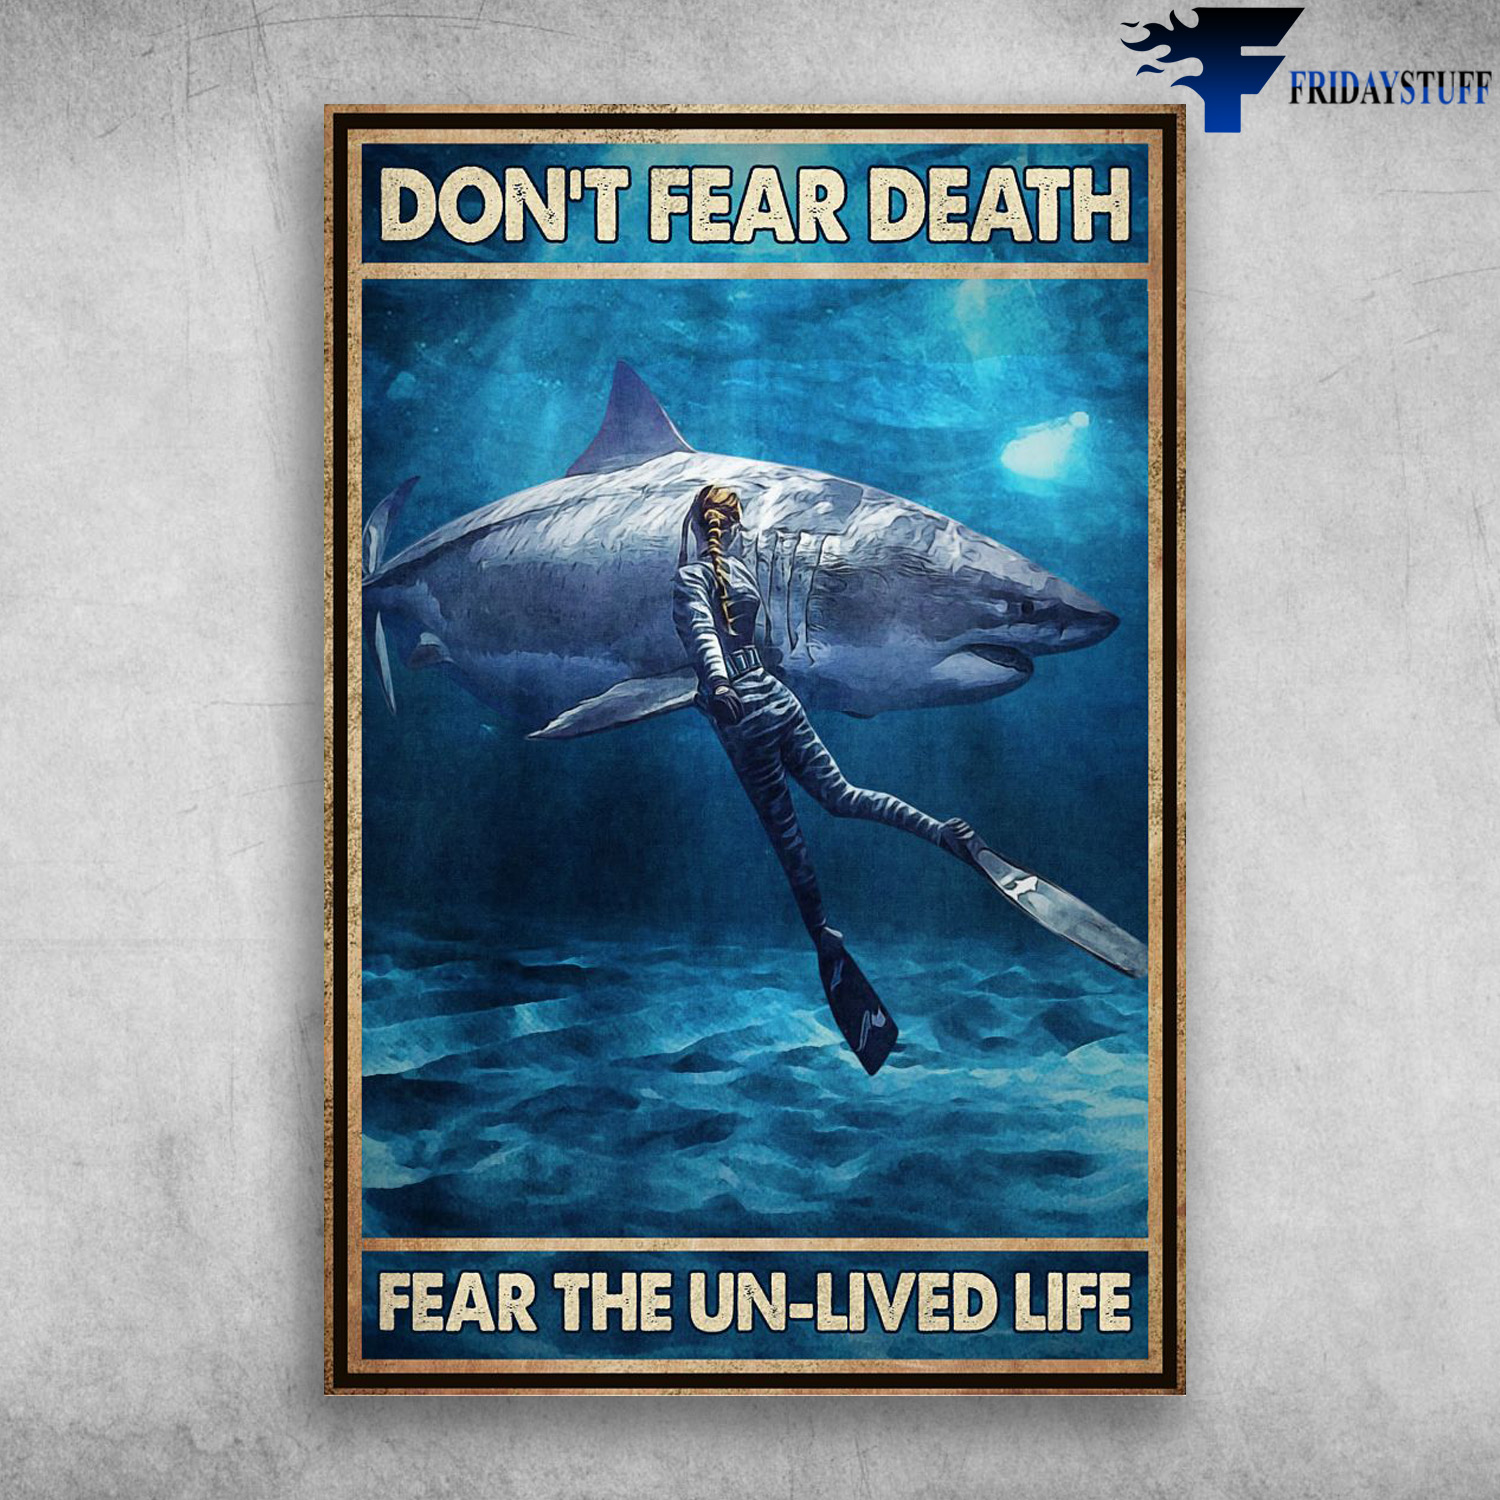 Diving With The Shark - Don't Fear Death, Fear The Un-Lived Life